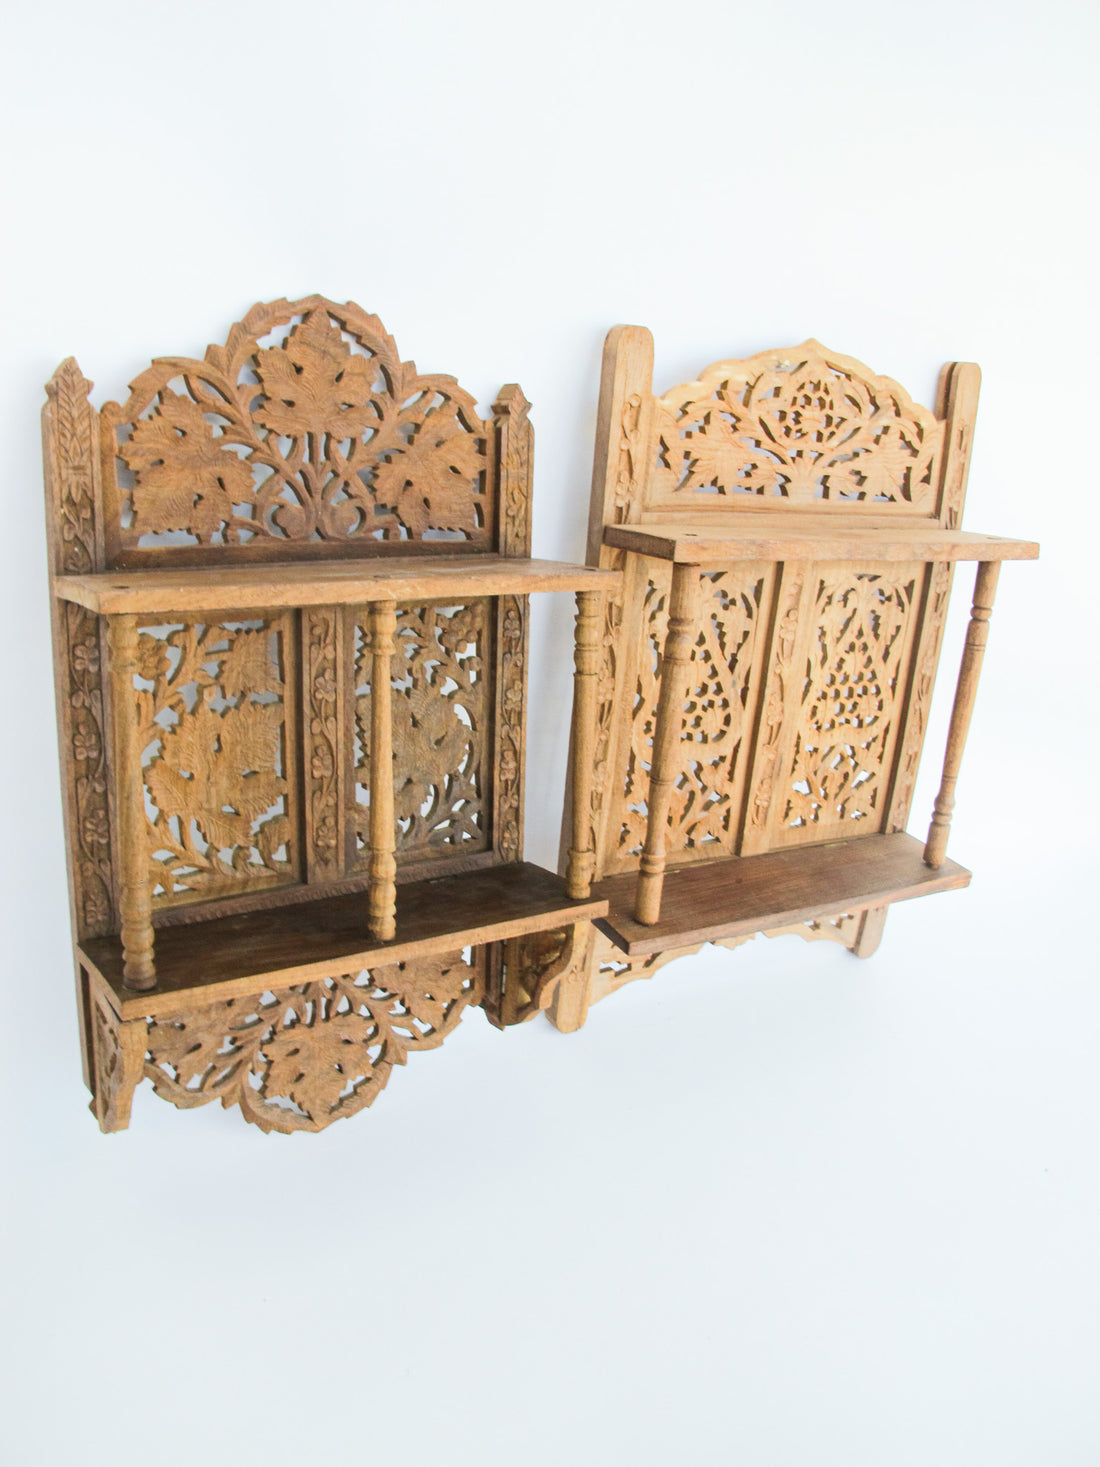 Teak Rosewood Indian Wall shelf with lattice detailing & foldable Shelves (each Sold Separately)